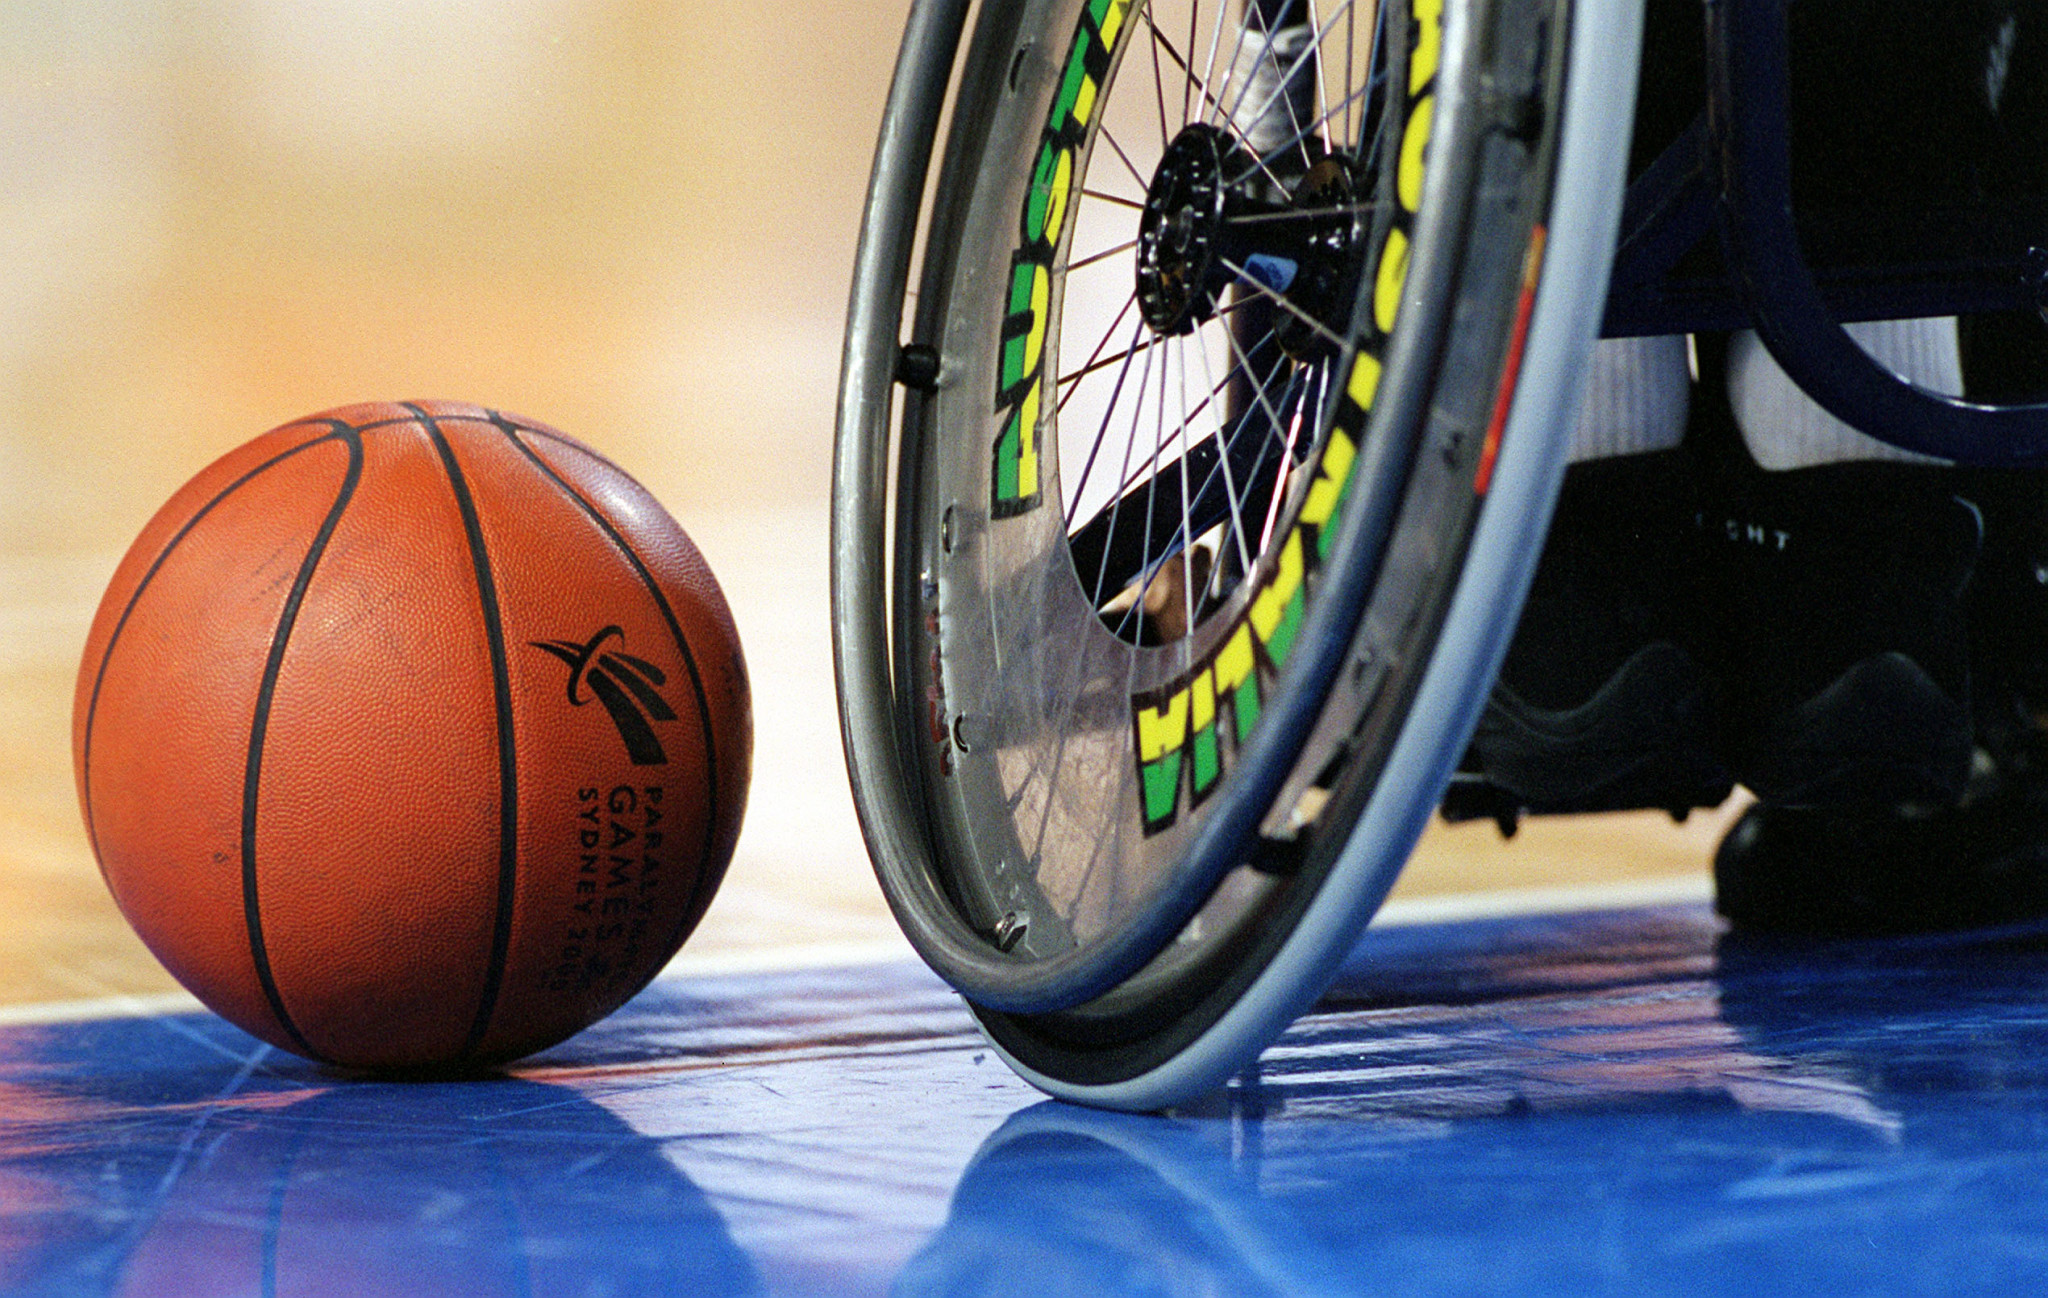 With numerous players now ineligible for Tokyo 2020, International Wheelchair Basketball Federation President Ulf Mehrens has said the organisation will call for changes to the International Paralympic Committee classification rules ©Getty Images